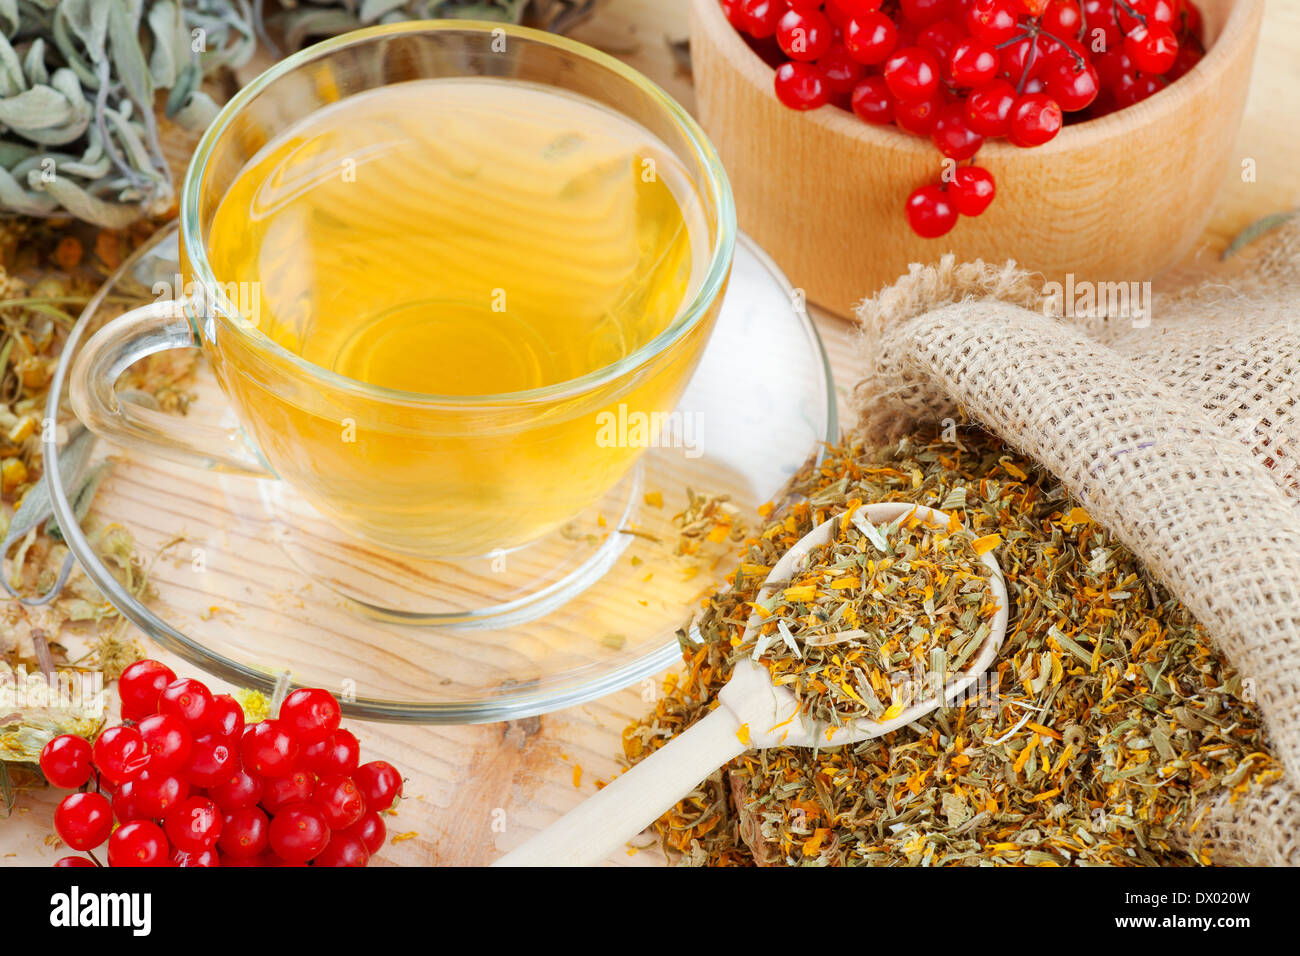 cup of herbal tea, medicinal herbs and healthy berries on table Stock Photo